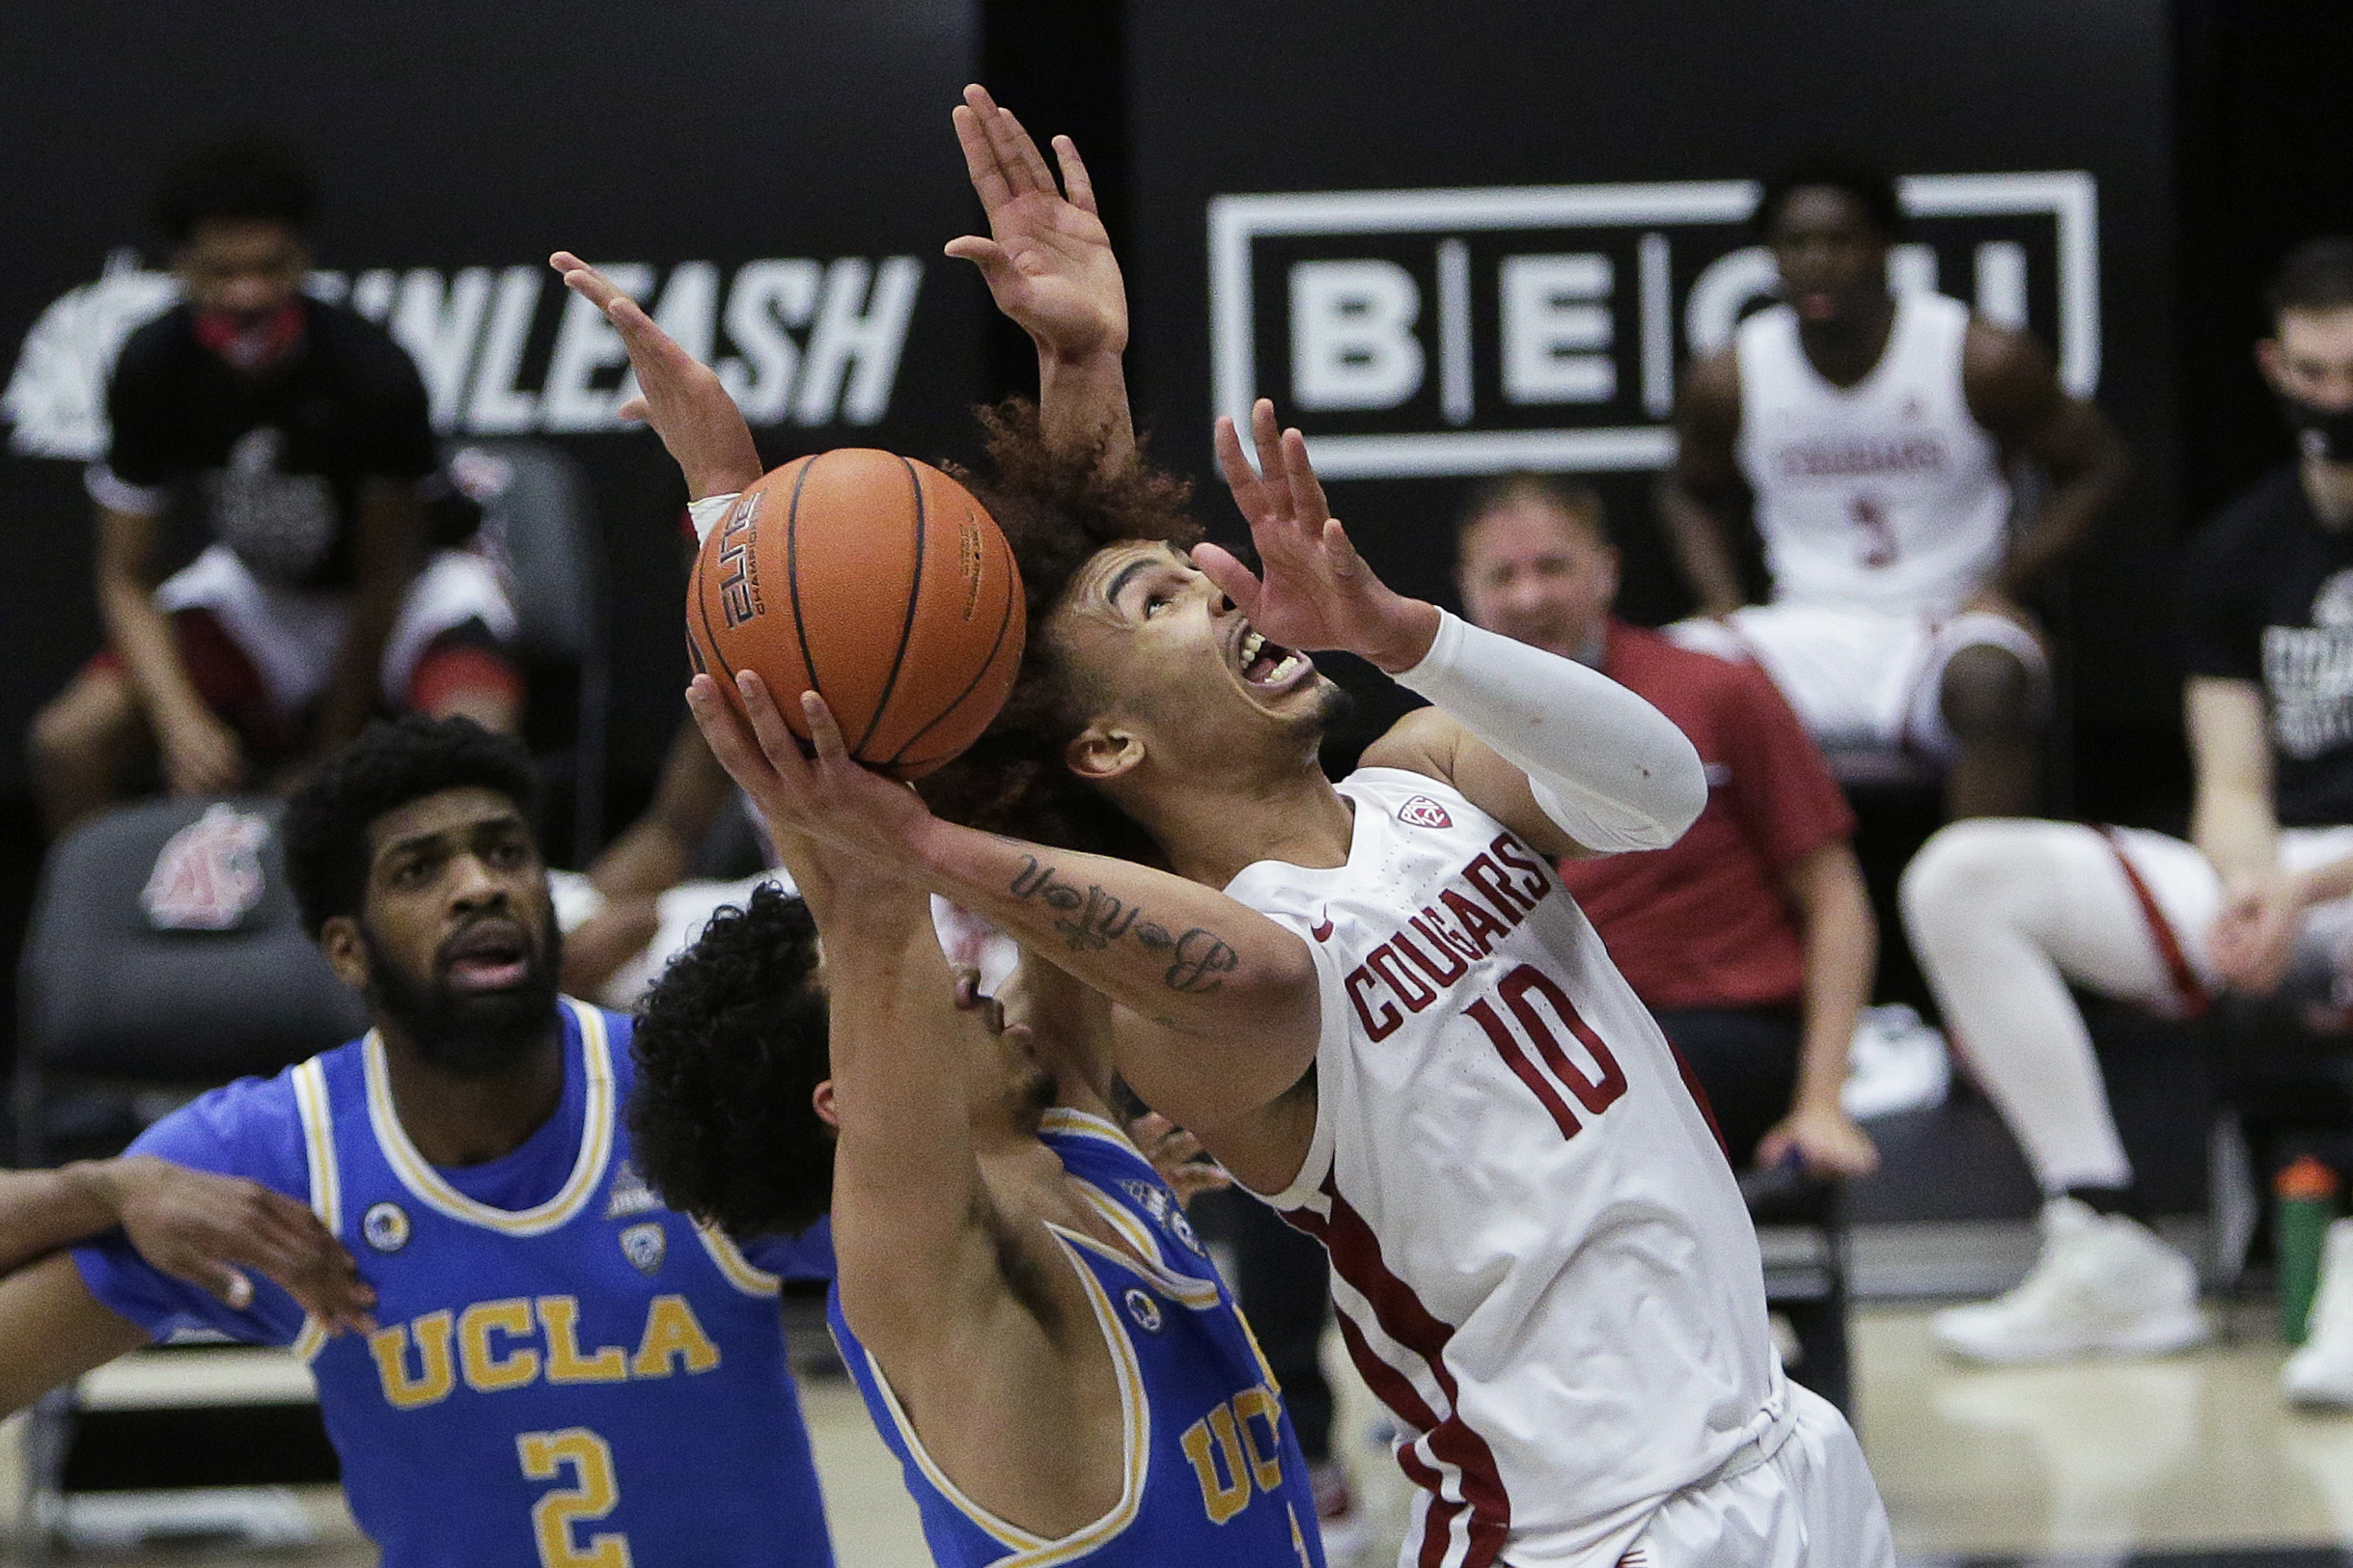 Washington State guard Isaac Bonton, right, shoots while pressured by UCLA guard Jules Bernard during the second half of an NCAA college basketball game in Pullman, Wash., Thursday, Feb. 11, 2021. Washington State won 81-73.